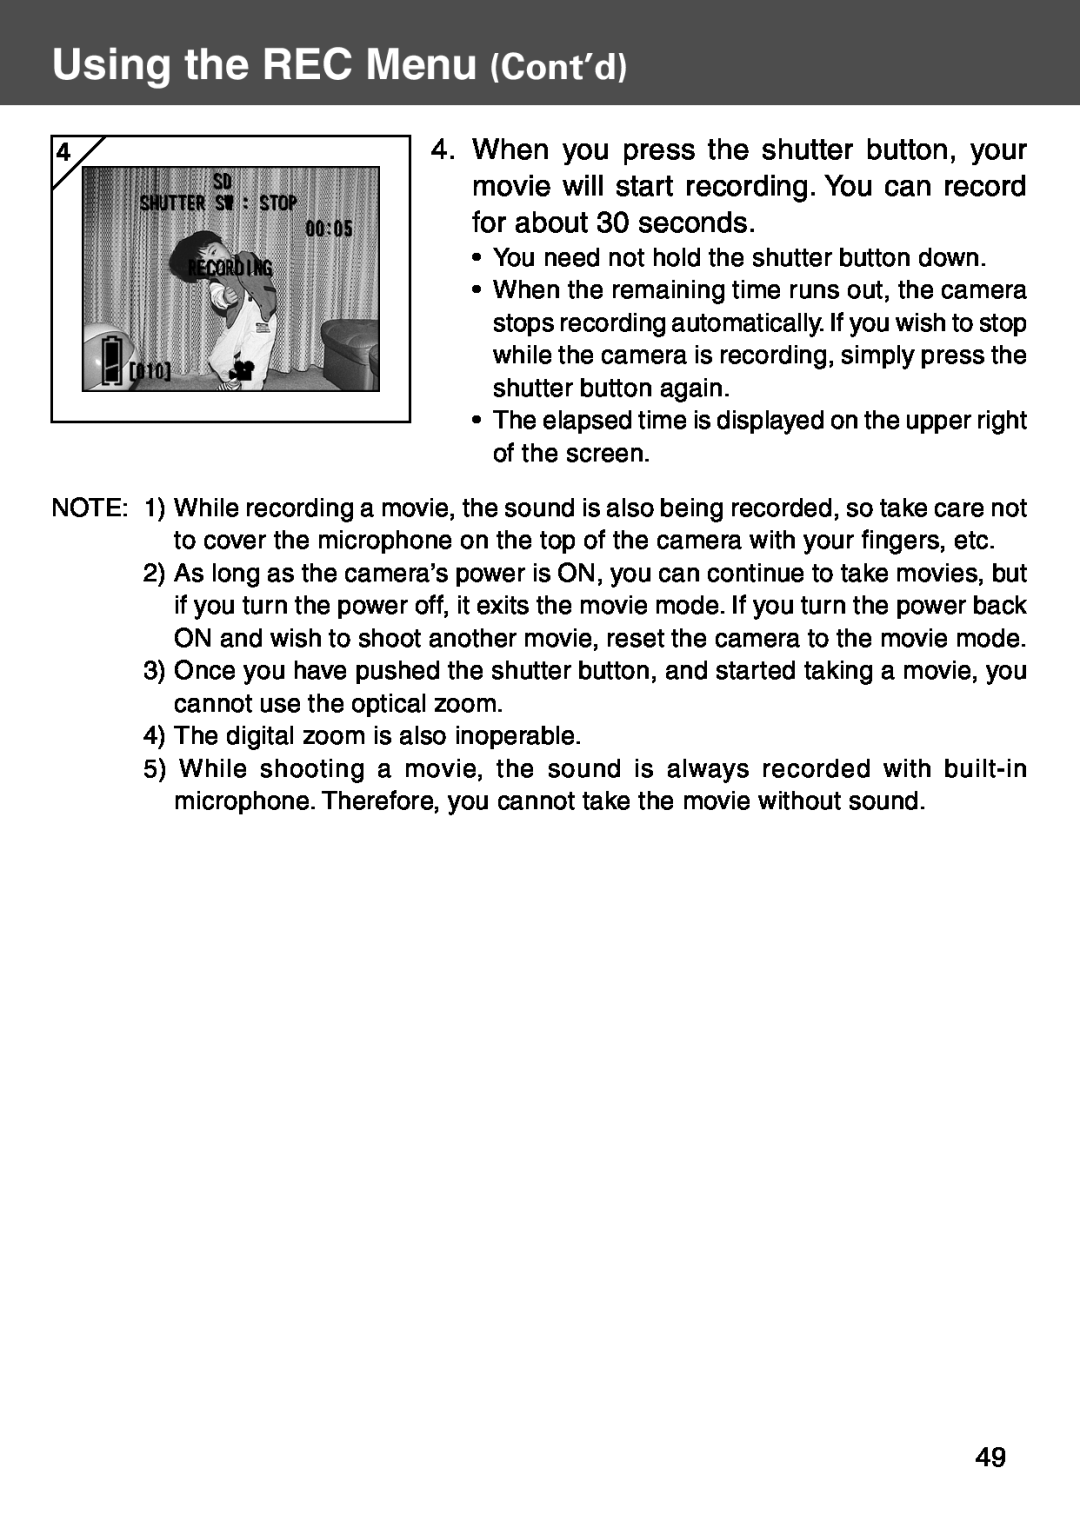 Konica Minolta KD-500Z user manual Using the REC Menu Cont’d, You need not hold the shutter button down 